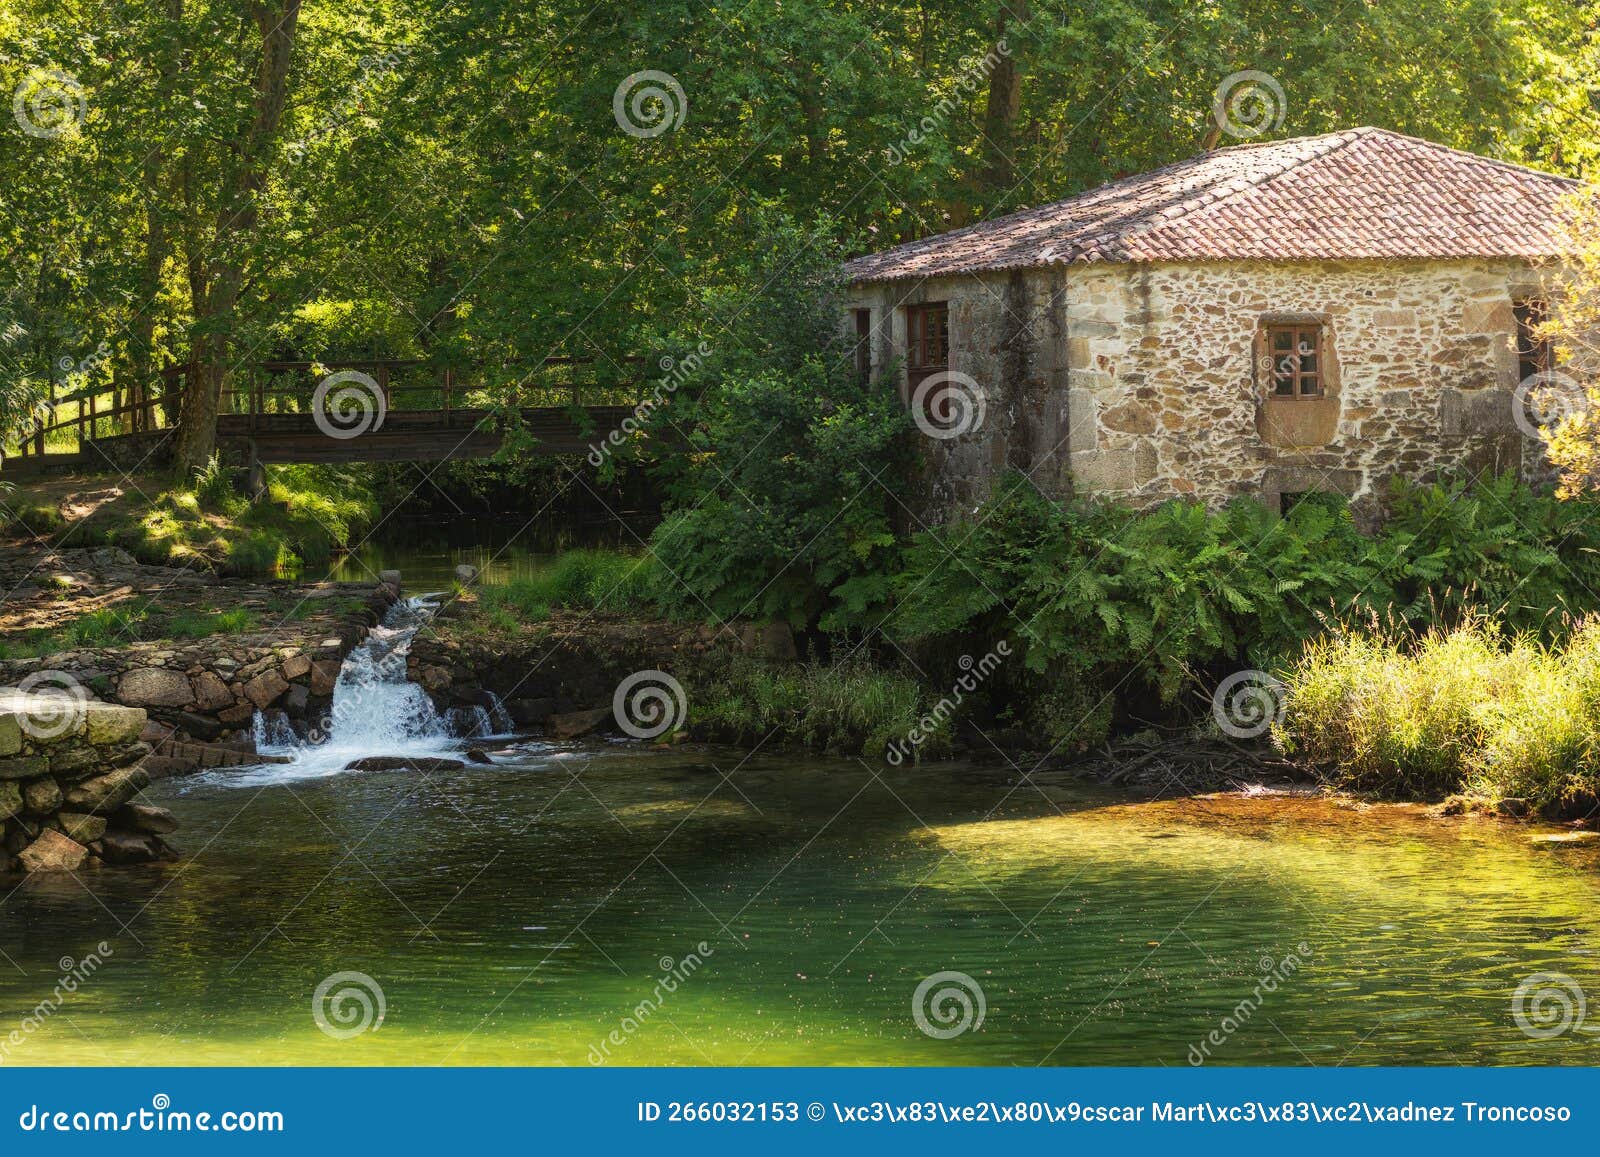 ancient water mill and wood bridge placed in tamuxe or carballas river in o rosal.